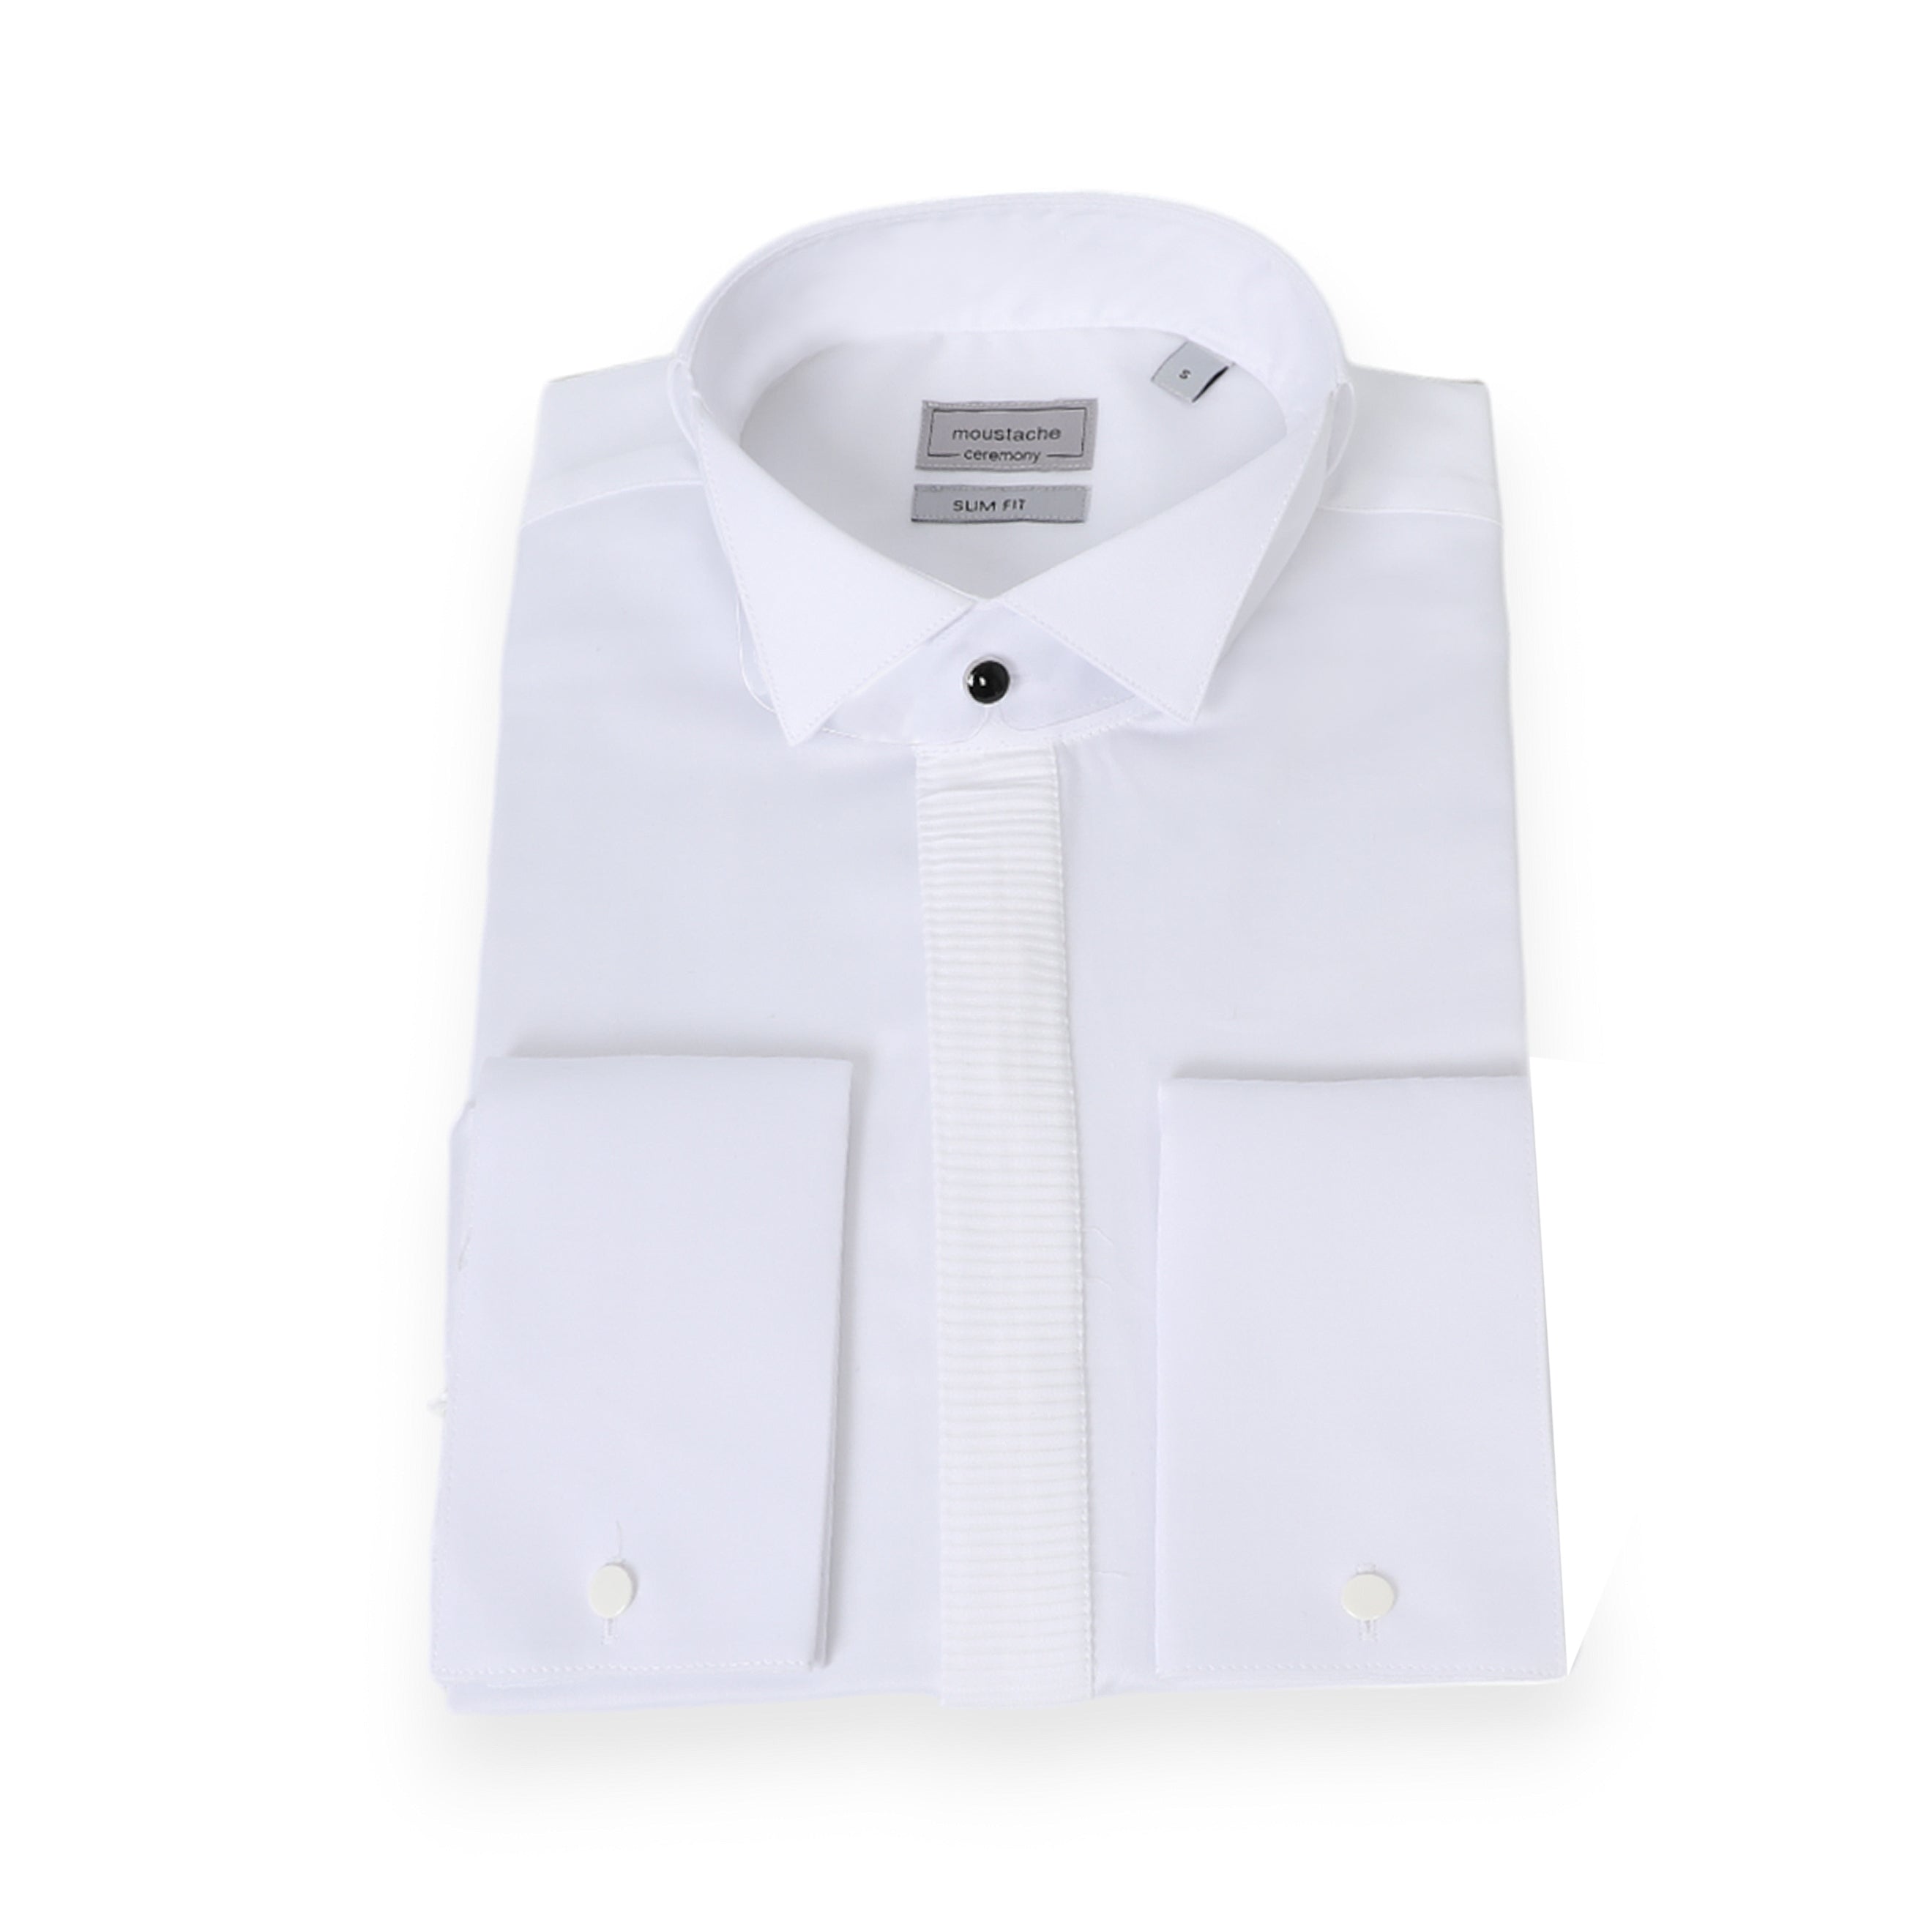 White Tuxedo Shirt Slim Fit With One Black Button